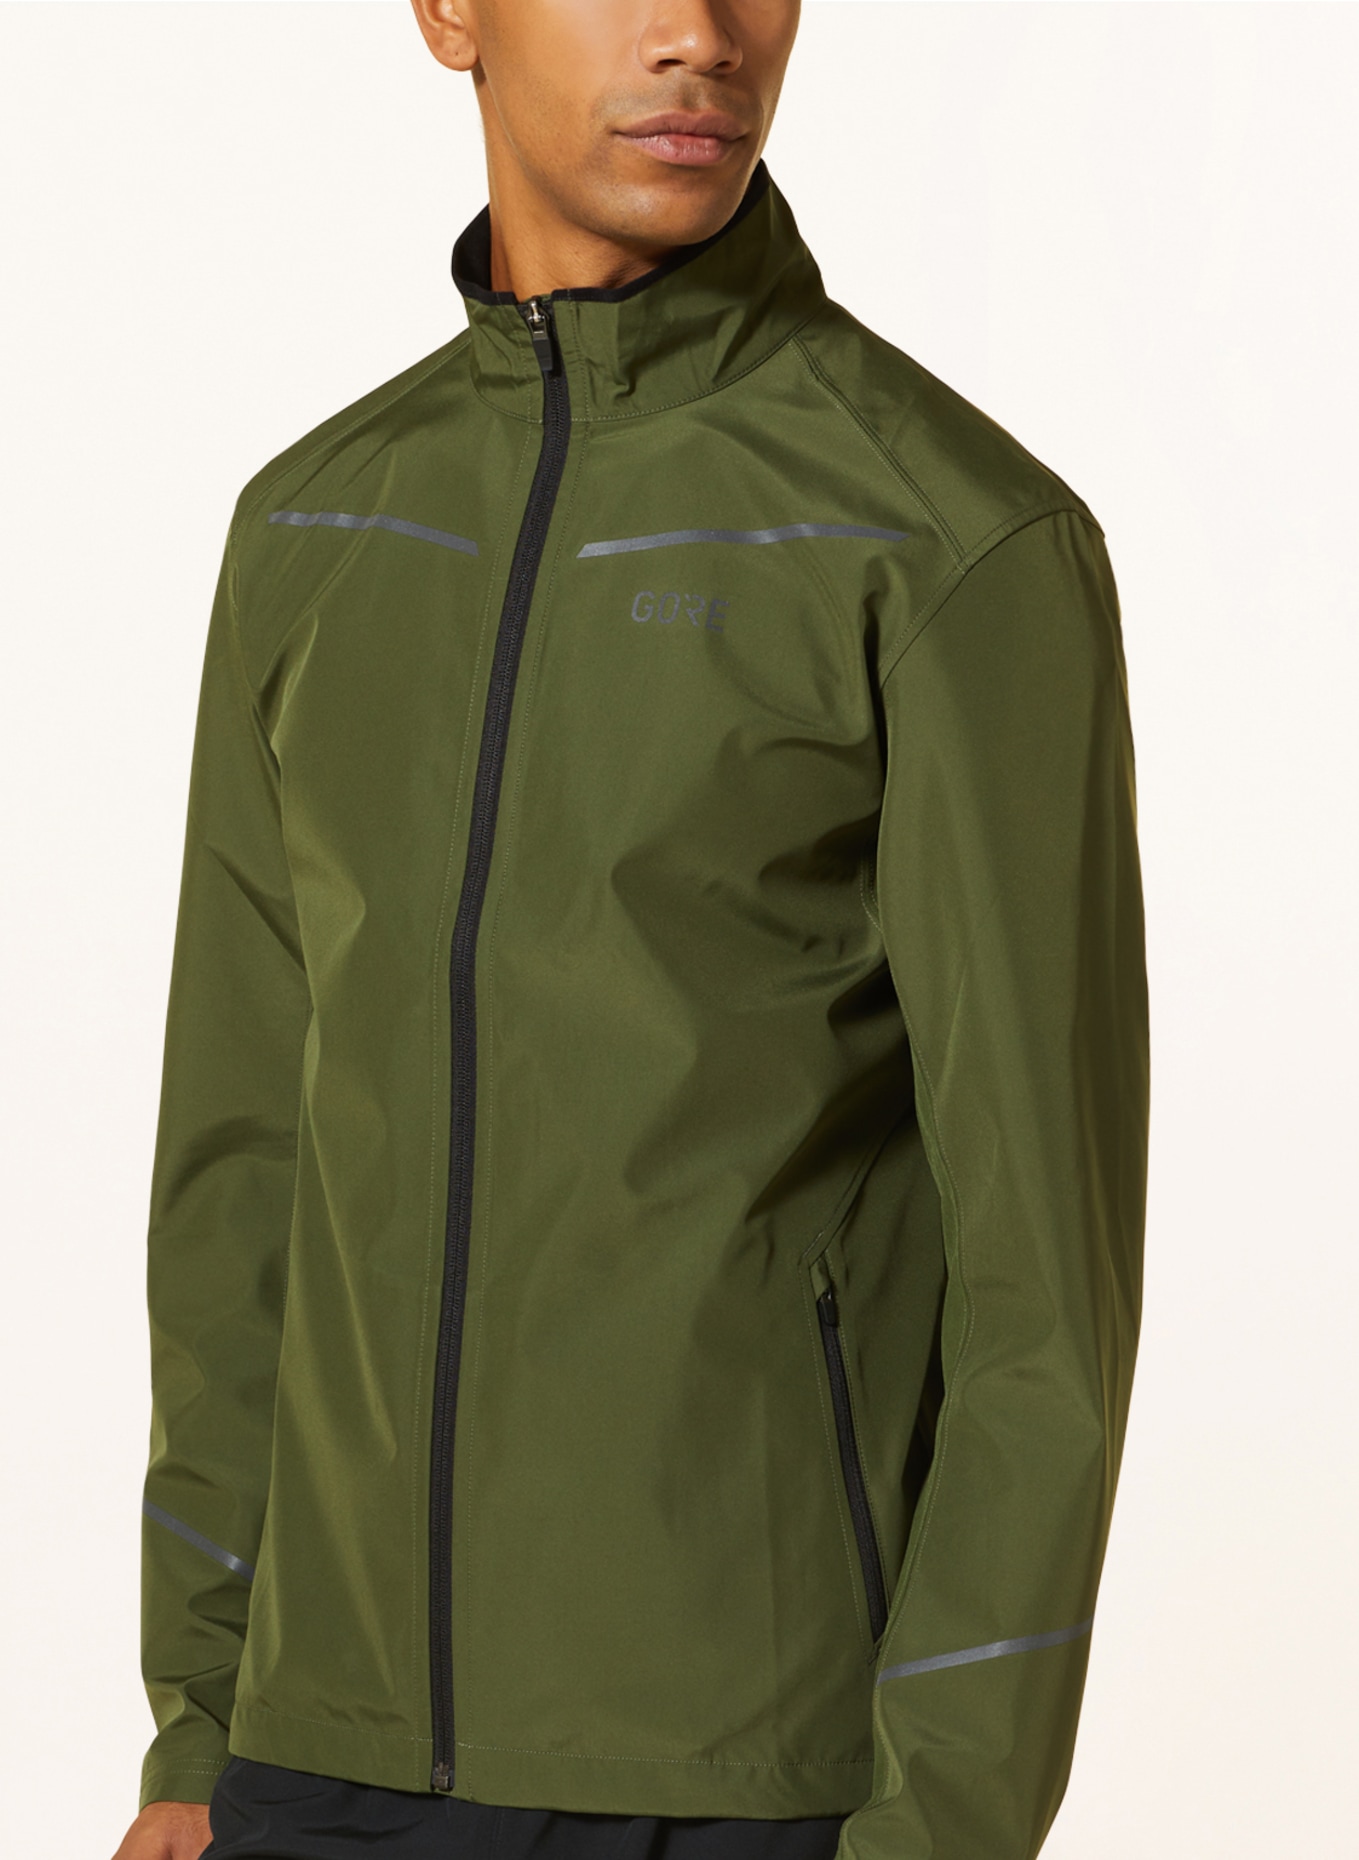 GORE RUNNING WEAR Running jacket R3 GORE® WINDSTOPPER® CLASSIC, Color: OLIVE (Image 4)